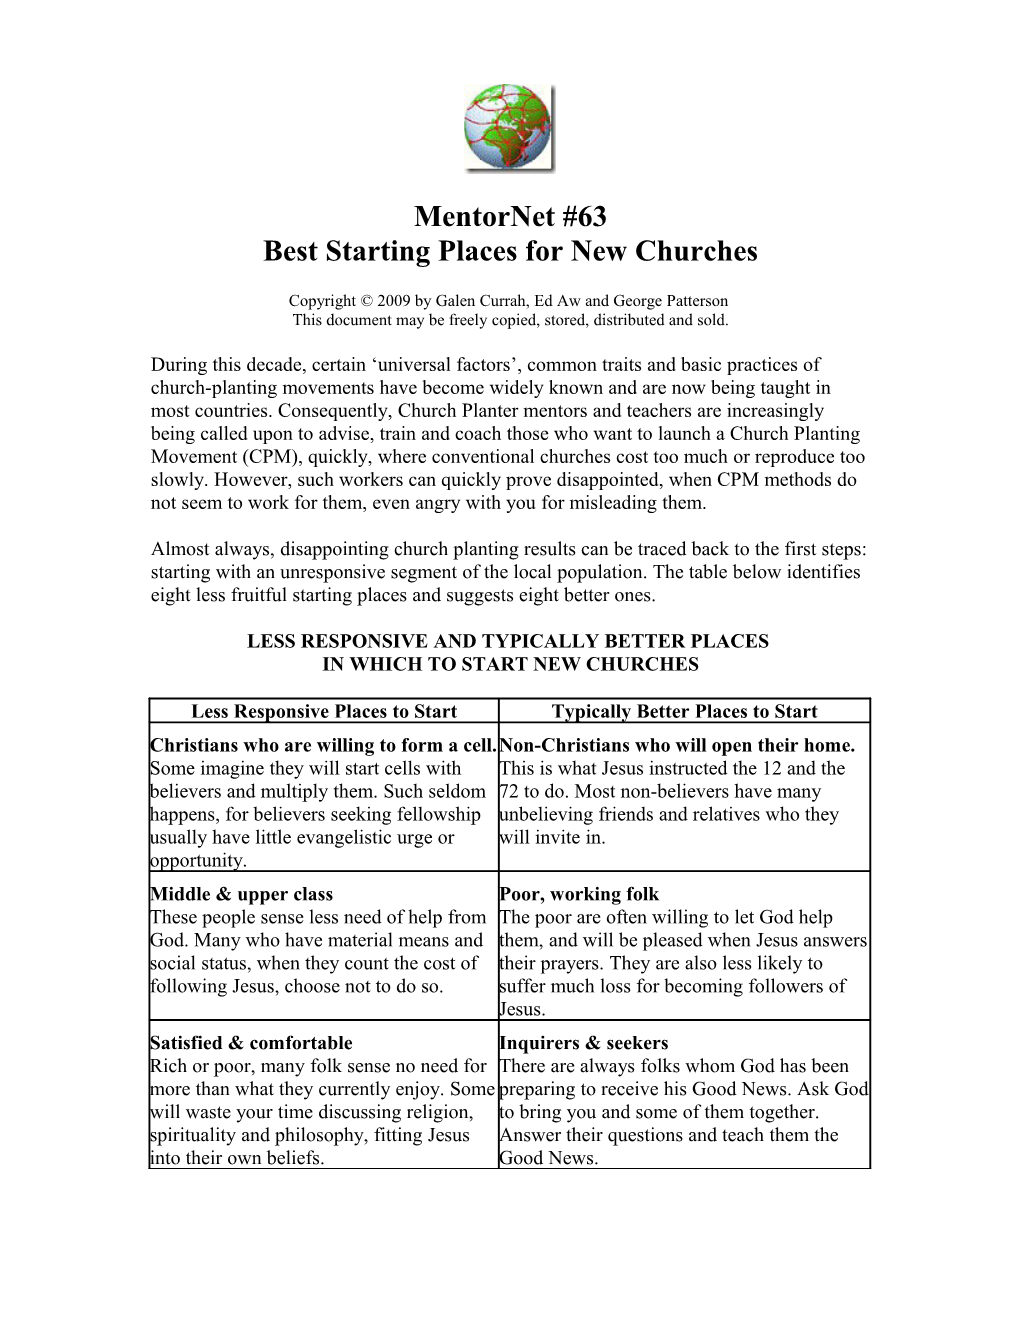 Mentornet #63 Best Starting Places for New Churches